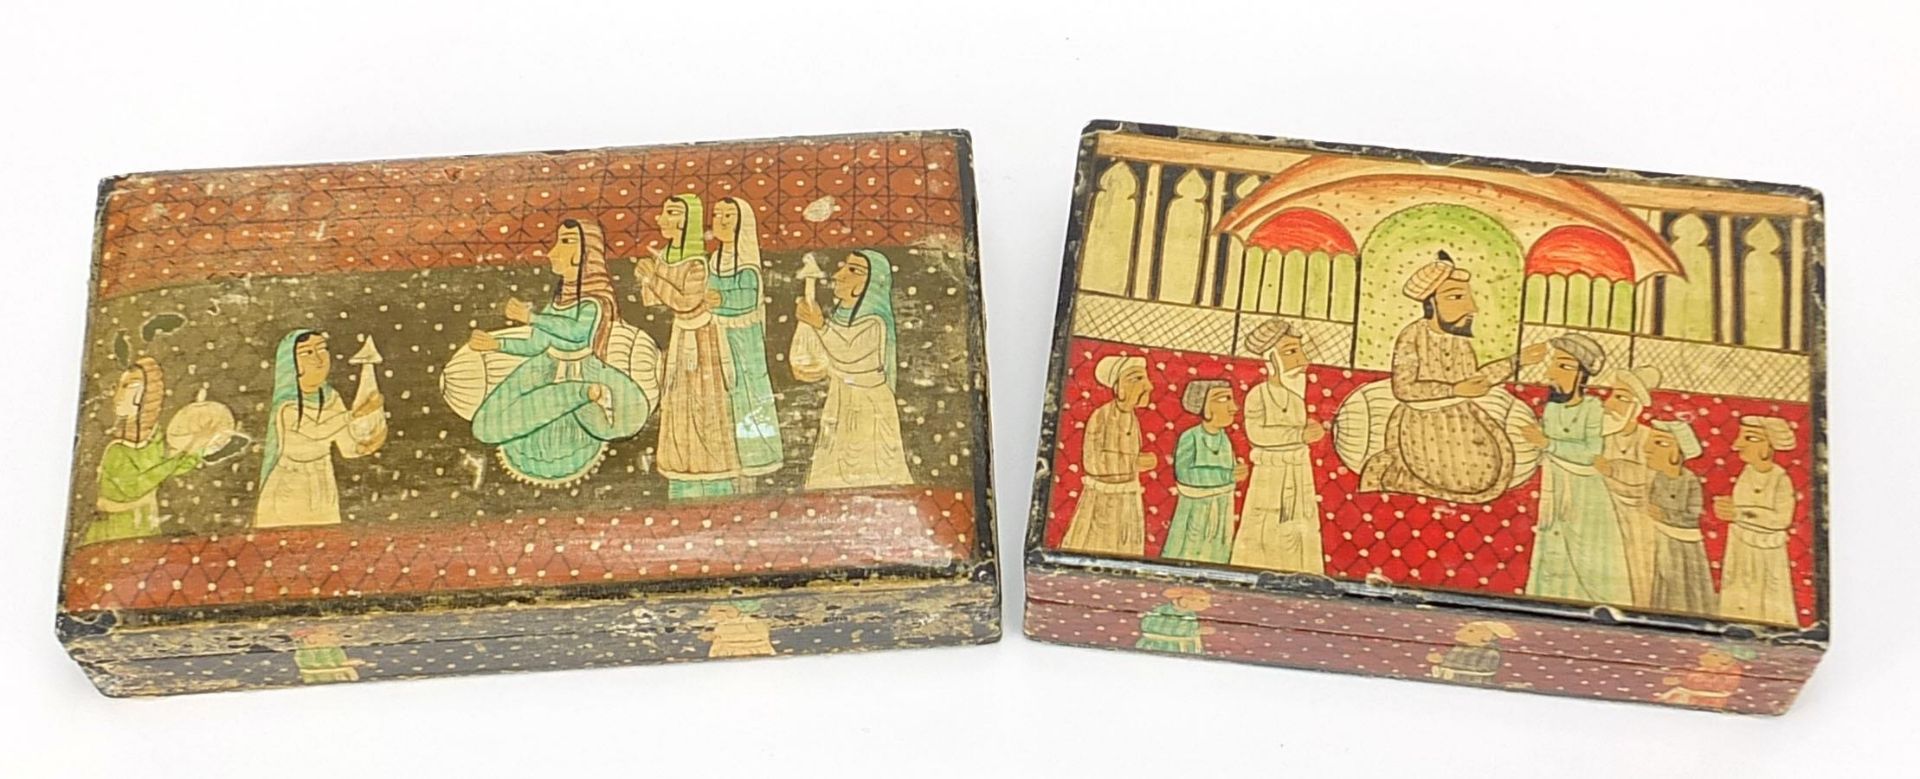 Two Indian Kashmir lacquered boxes and covers hand painted with figures praying, one with paper - Image 2 of 6